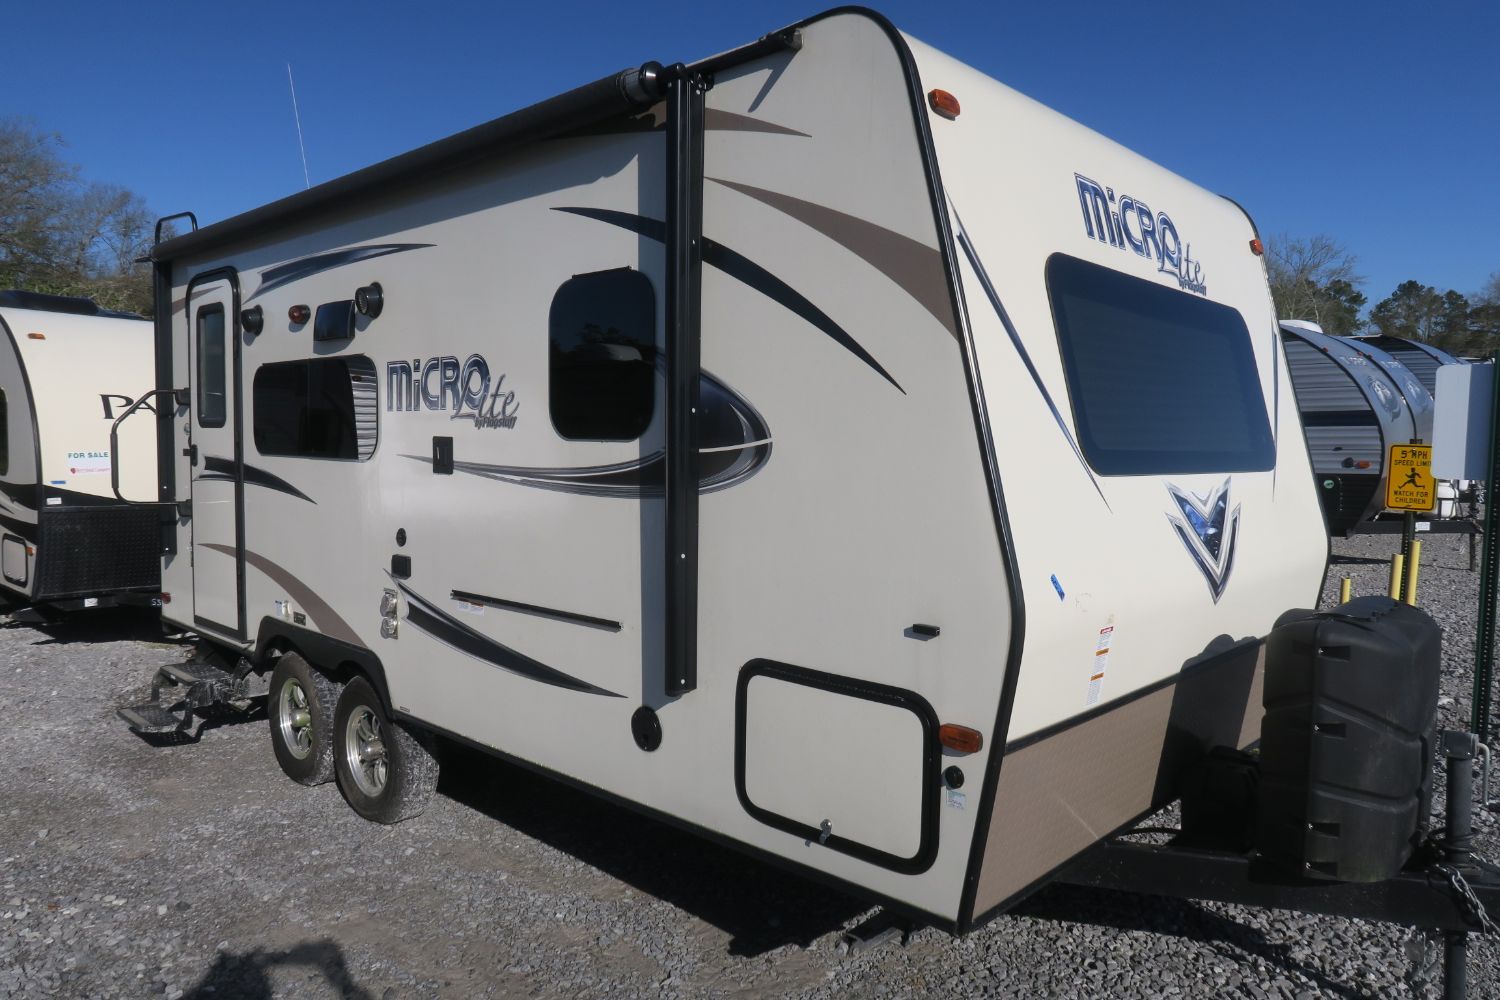 USED 2017 FLAGSTAFF MICRO LITE 21FBRS - Overview | Berryland Campers 2017 Flagstaff Micro Lite 21fbrs For Sale